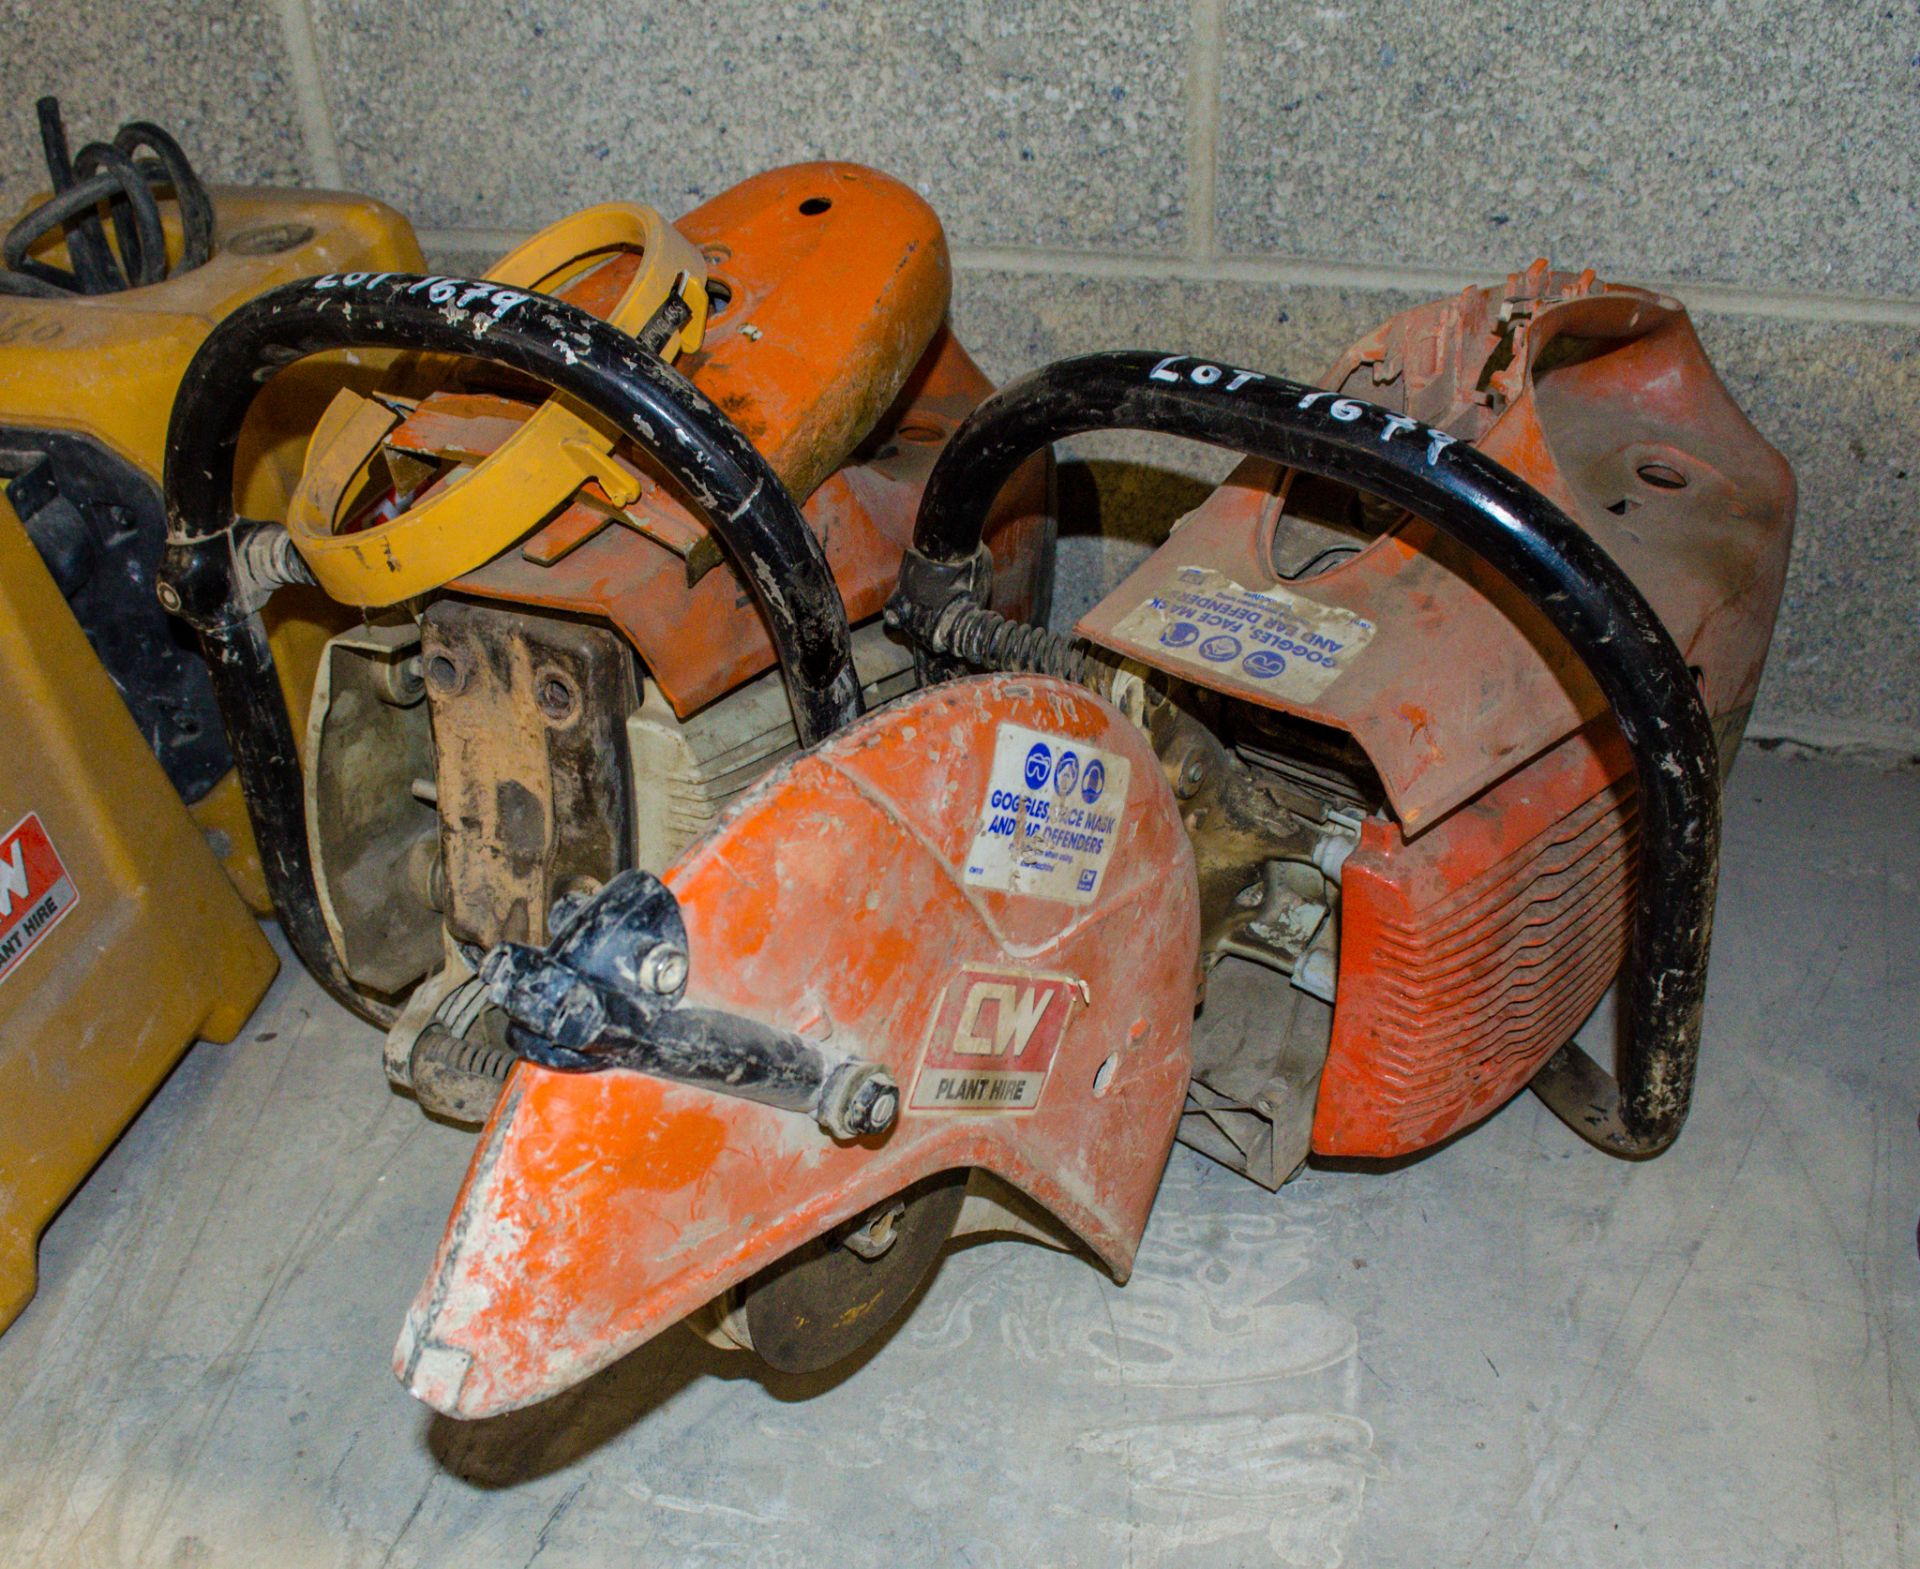 2 - Stihl TS410 petrol driven cut off saws ** For spares **